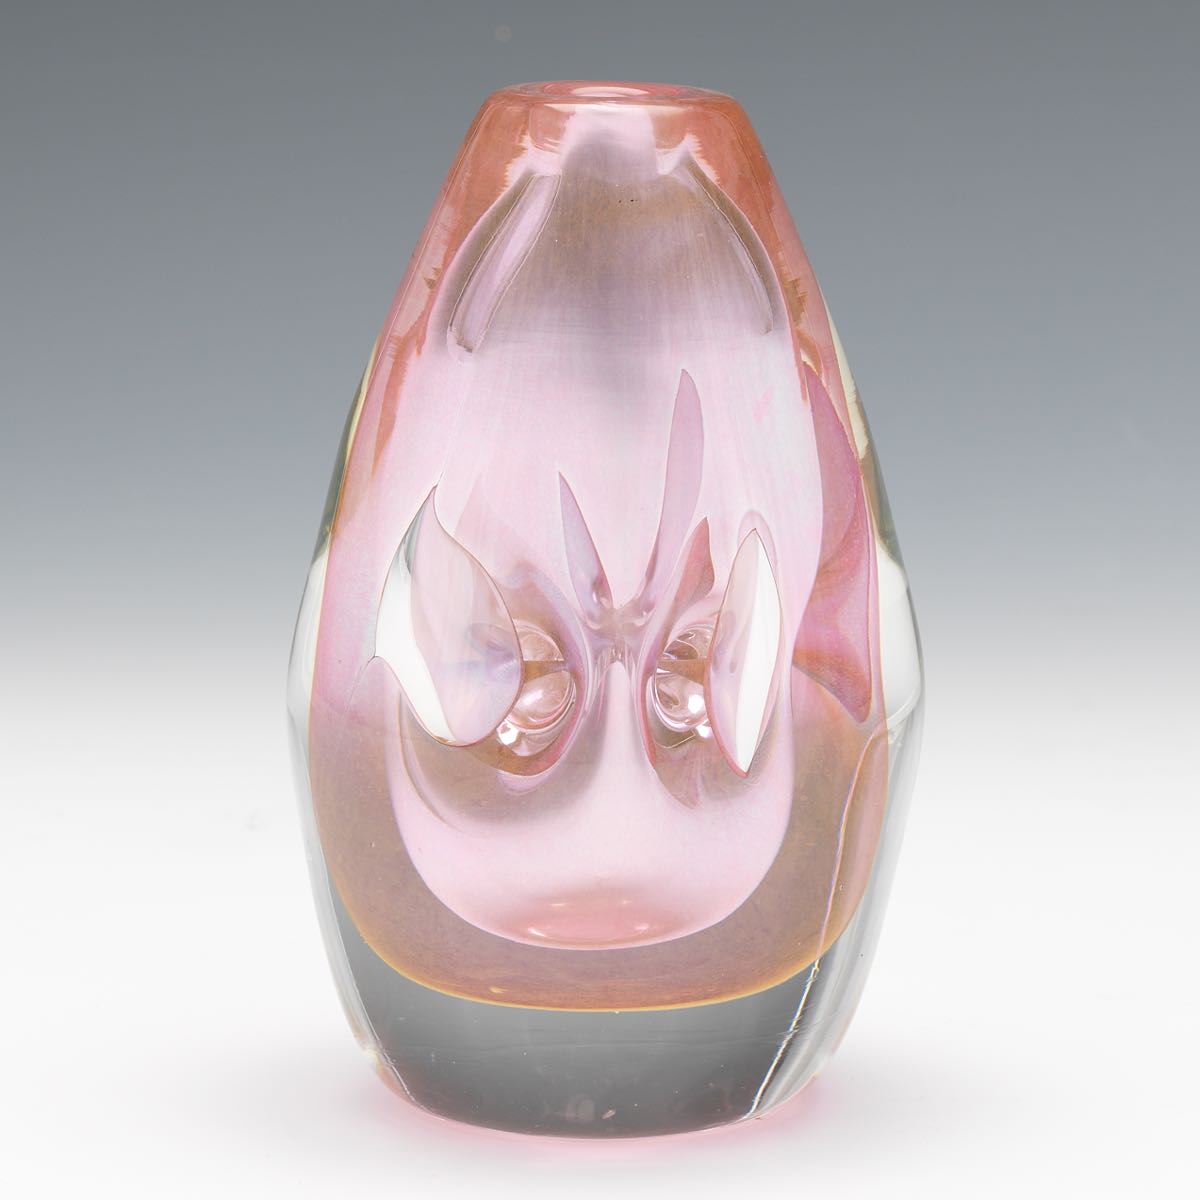 Dominick Labino (American, 1910-1987) 5-1/2" x 3-1/2"Blown glass vase in clear and colorless pink - Image 4 of 8